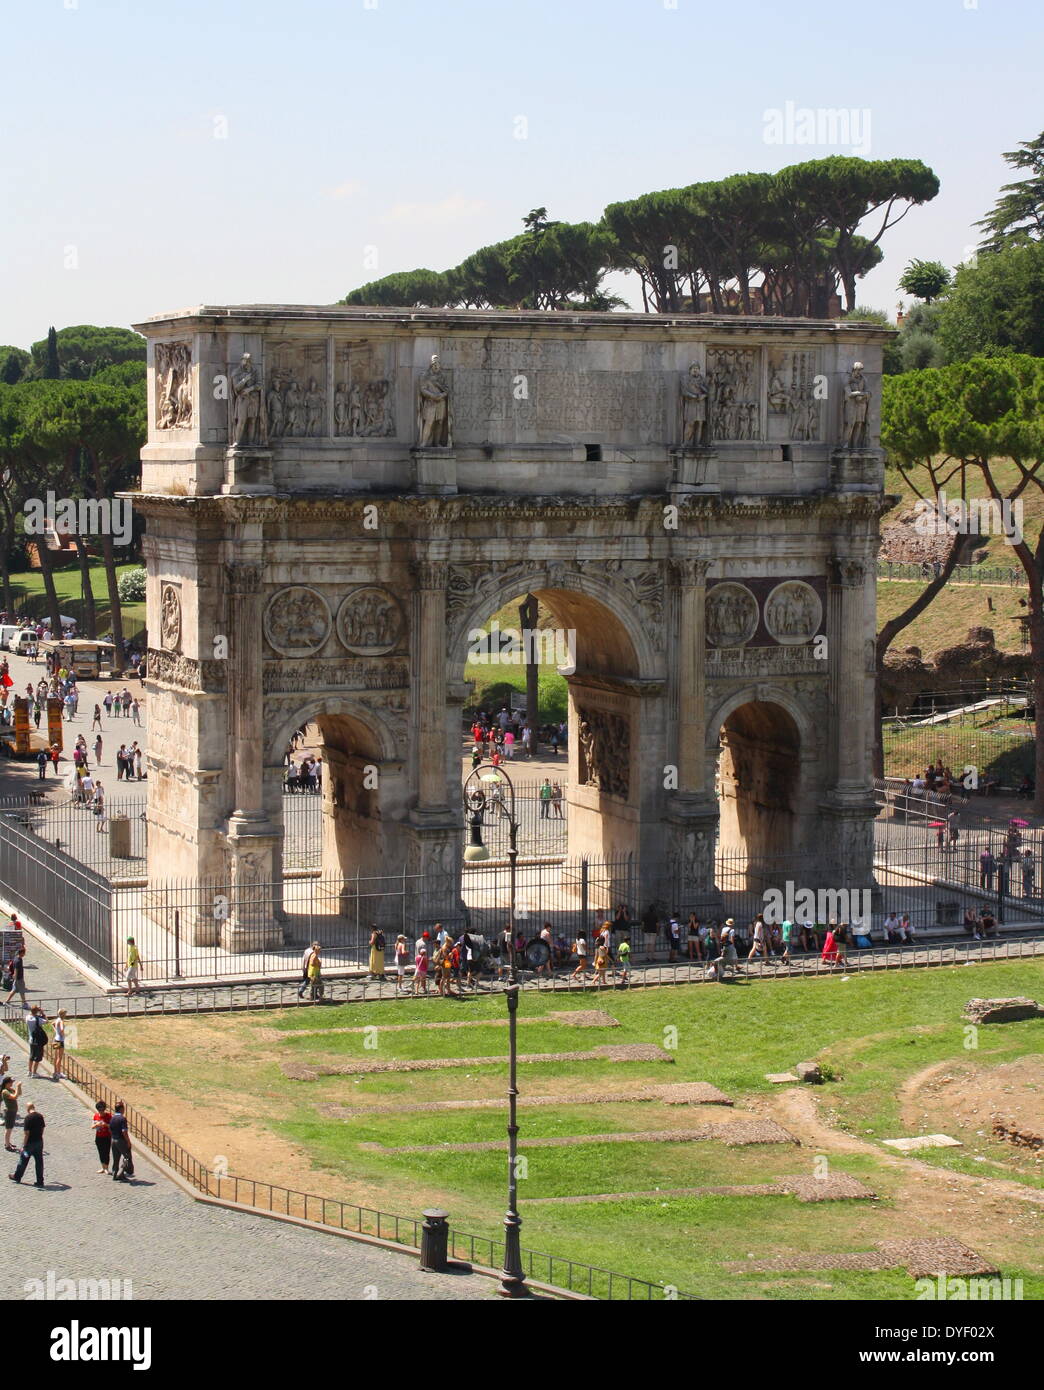 The Arch of Constantine, a triumphal, or victory arch in Rome. It is positioned between the Collosseum and the Palatine Hill. It commemorates Emperor Constantine's victory in the Battle of Milvian Bridge in the early 4th century AD. It was dedicated in 315 AD and features reliefs/friezes documenting previous Emperors and victory figures. Stock Photo